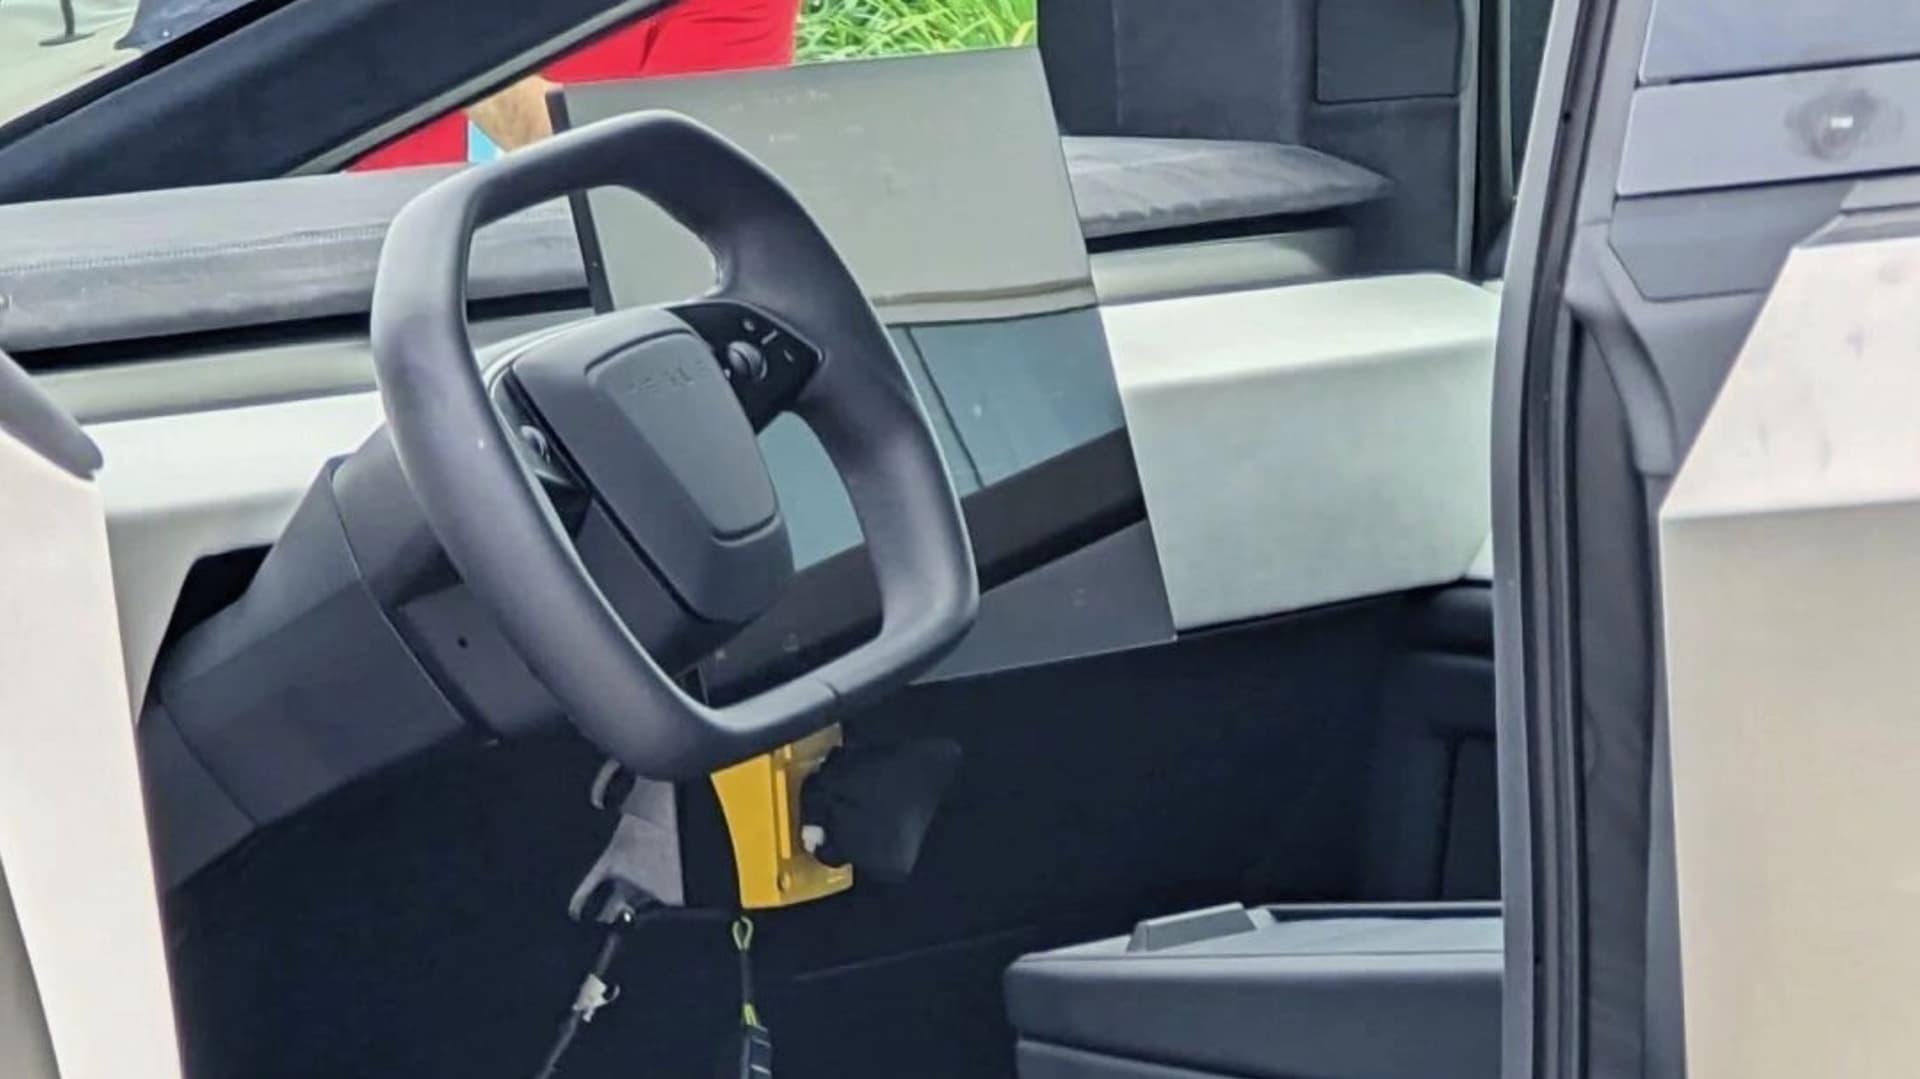 Tesla Cybertruck Interior Image Leaked Ahead Of Late Launch